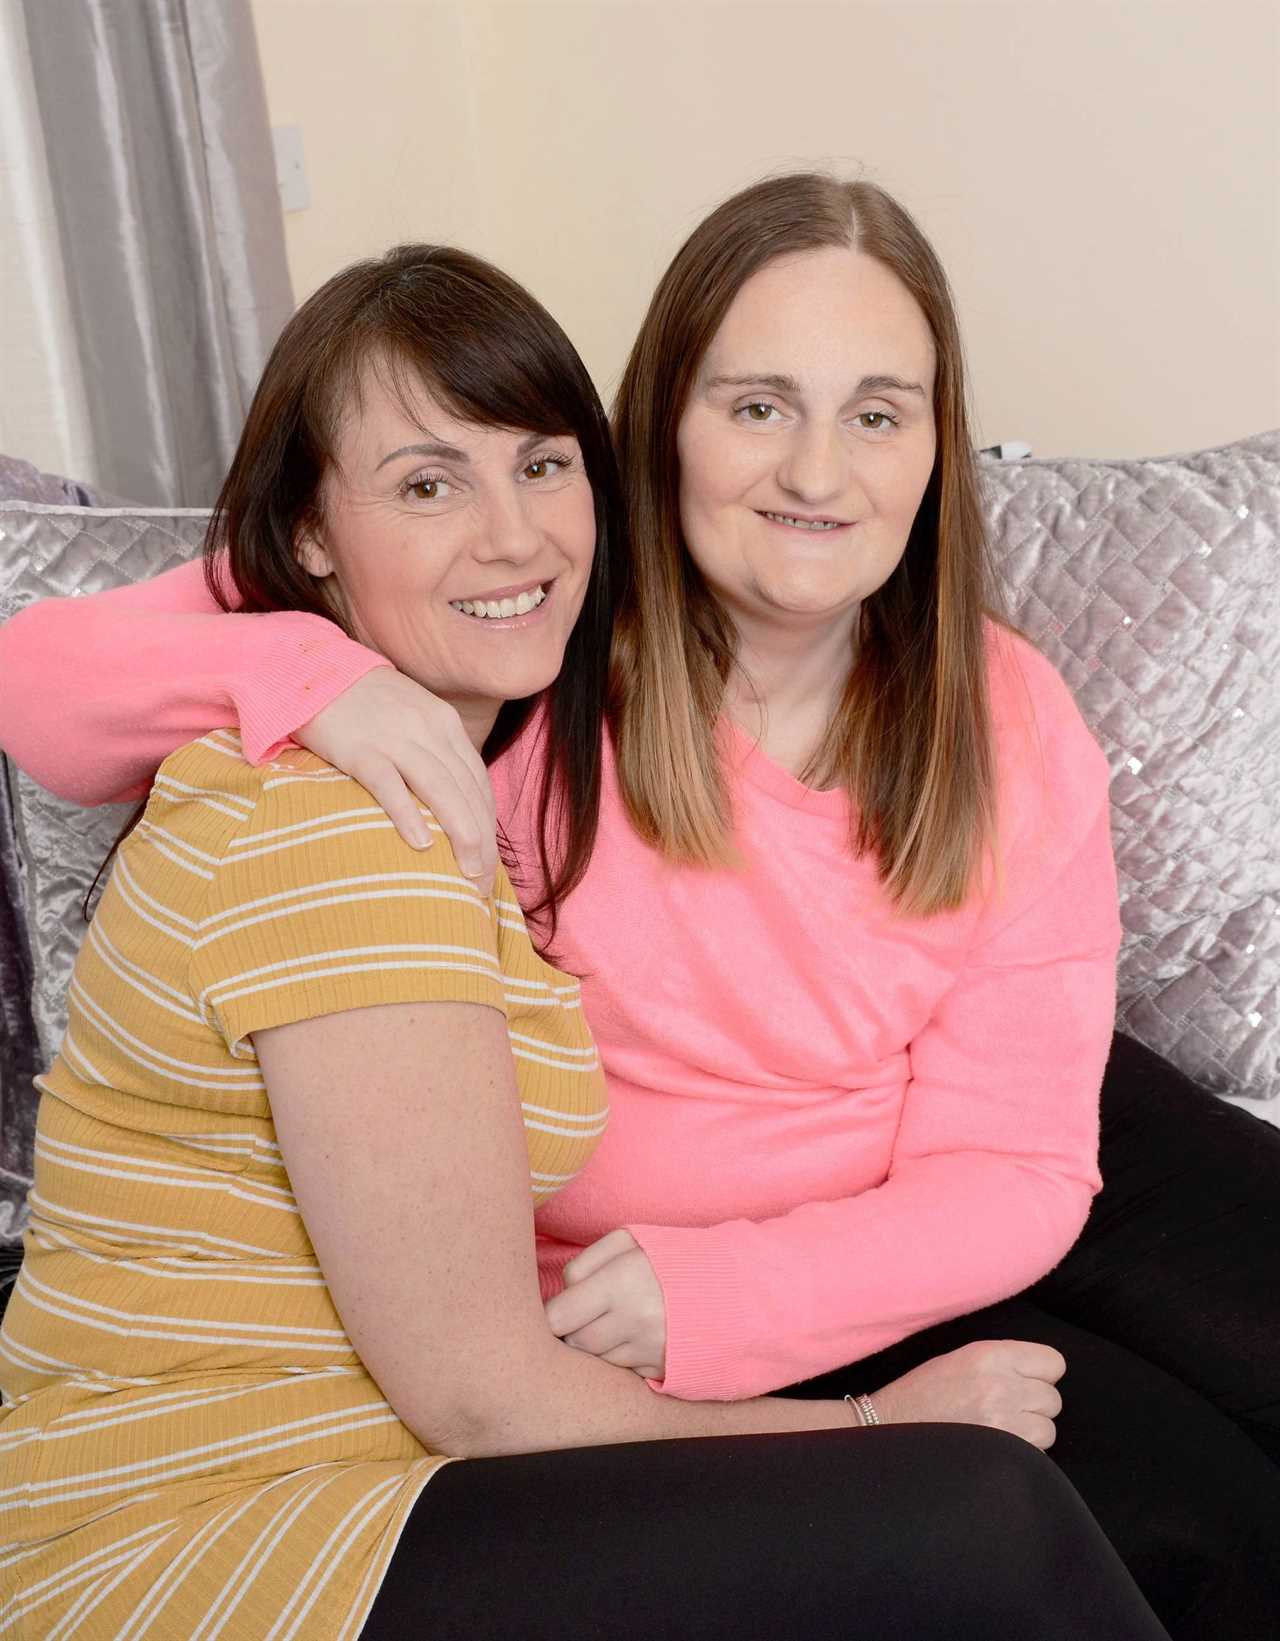 Mum, 32, gives birth to baby girl while in coma battling Covid